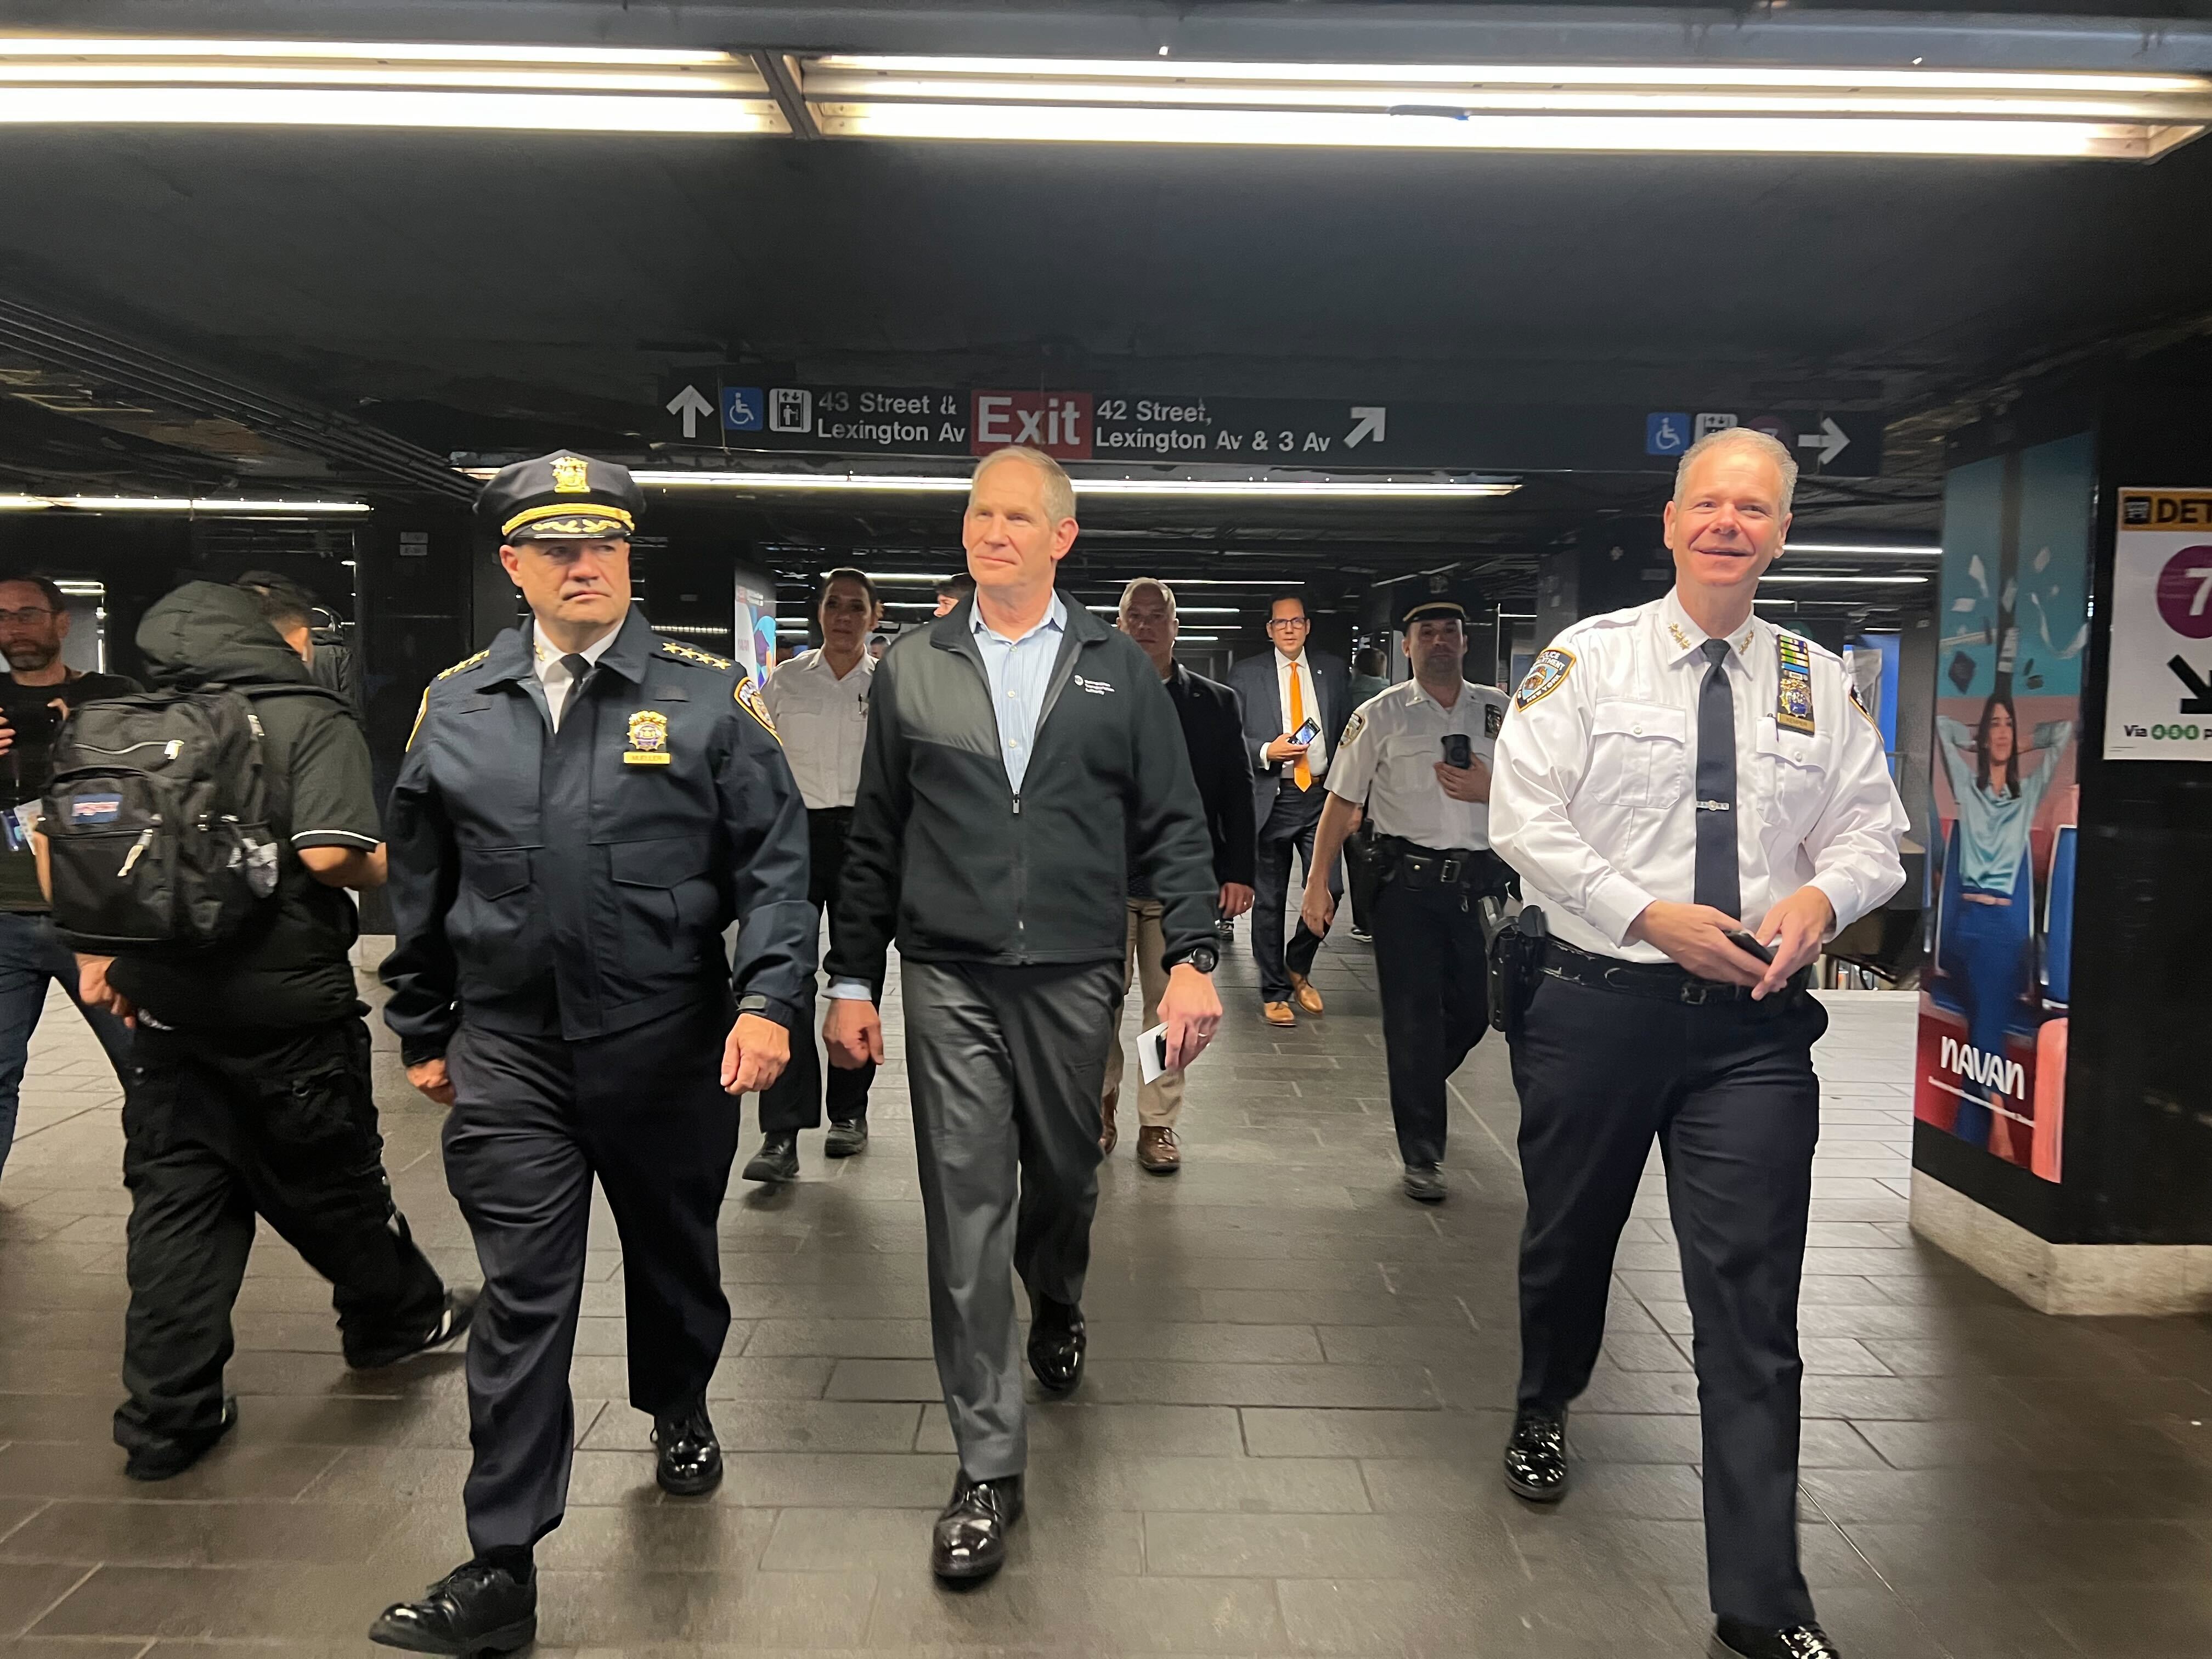 MTA Chair and CEO Janno Lieber joined MTA Chief Safety and Security Officer Patrick Warren, MTA Police Chief John Mueller, and NYPD Chief of Transit Michael Kemper to view safety protocols at Grand Central Terminal and the Grand Central subway station. 